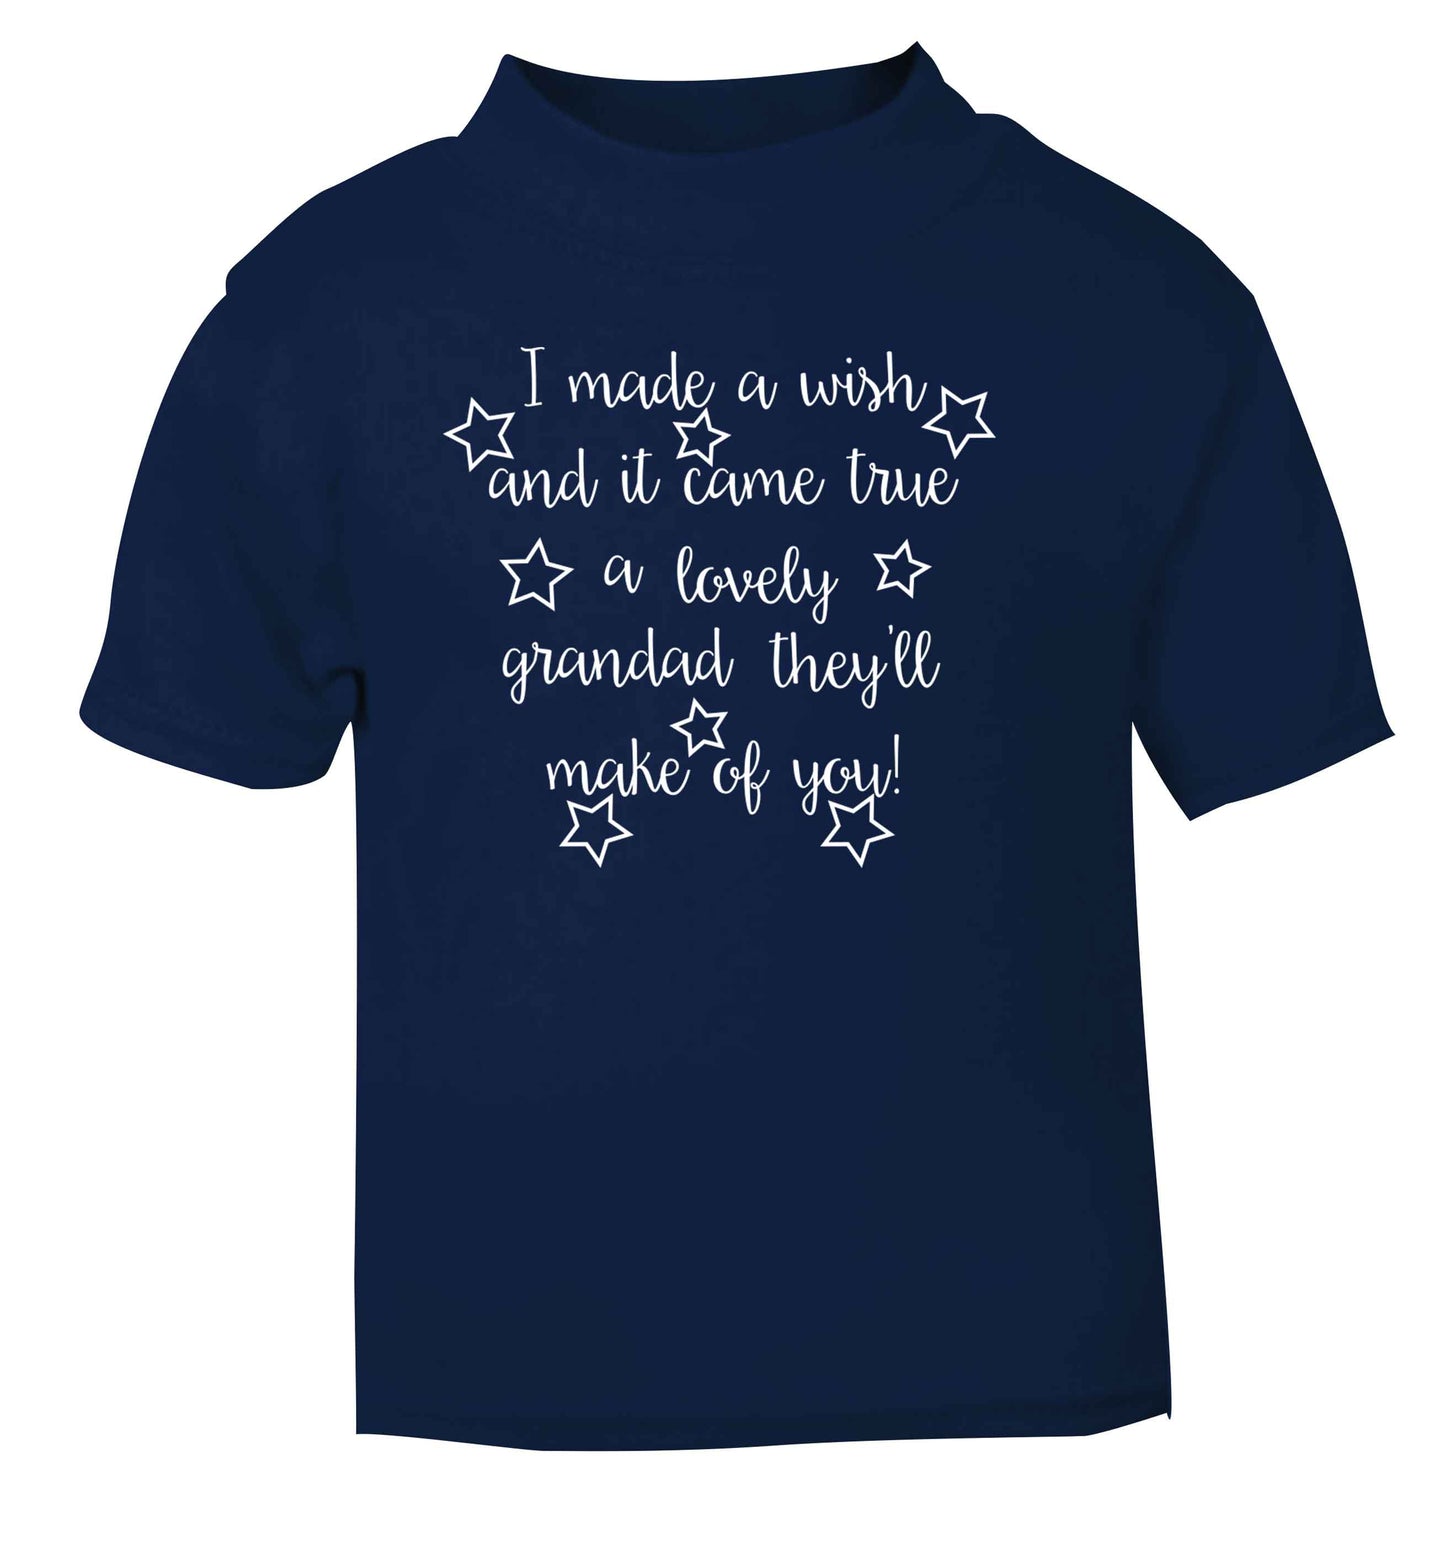 I made a wish and it came true a lovely grandad they'll make of you! navy Baby Toddler Tshirt 2 Years